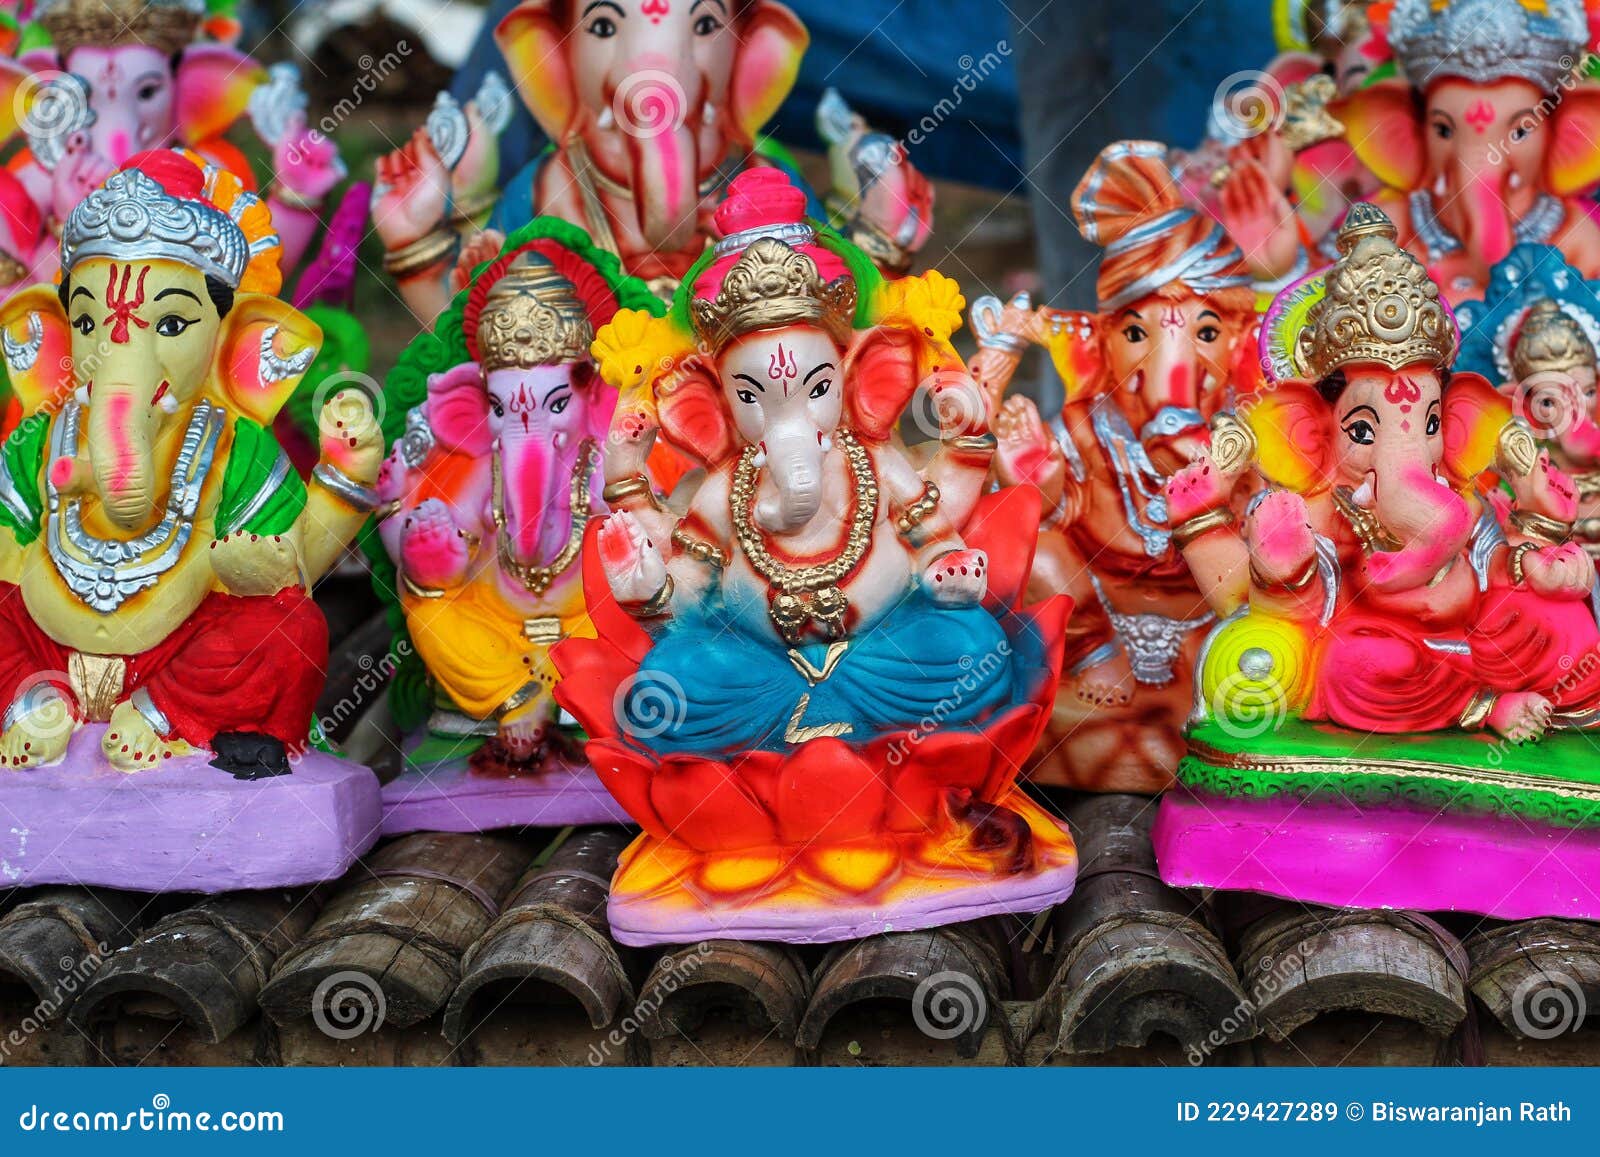 Different Types of Lord Ganesh Idol Arranged Beautifully for ...